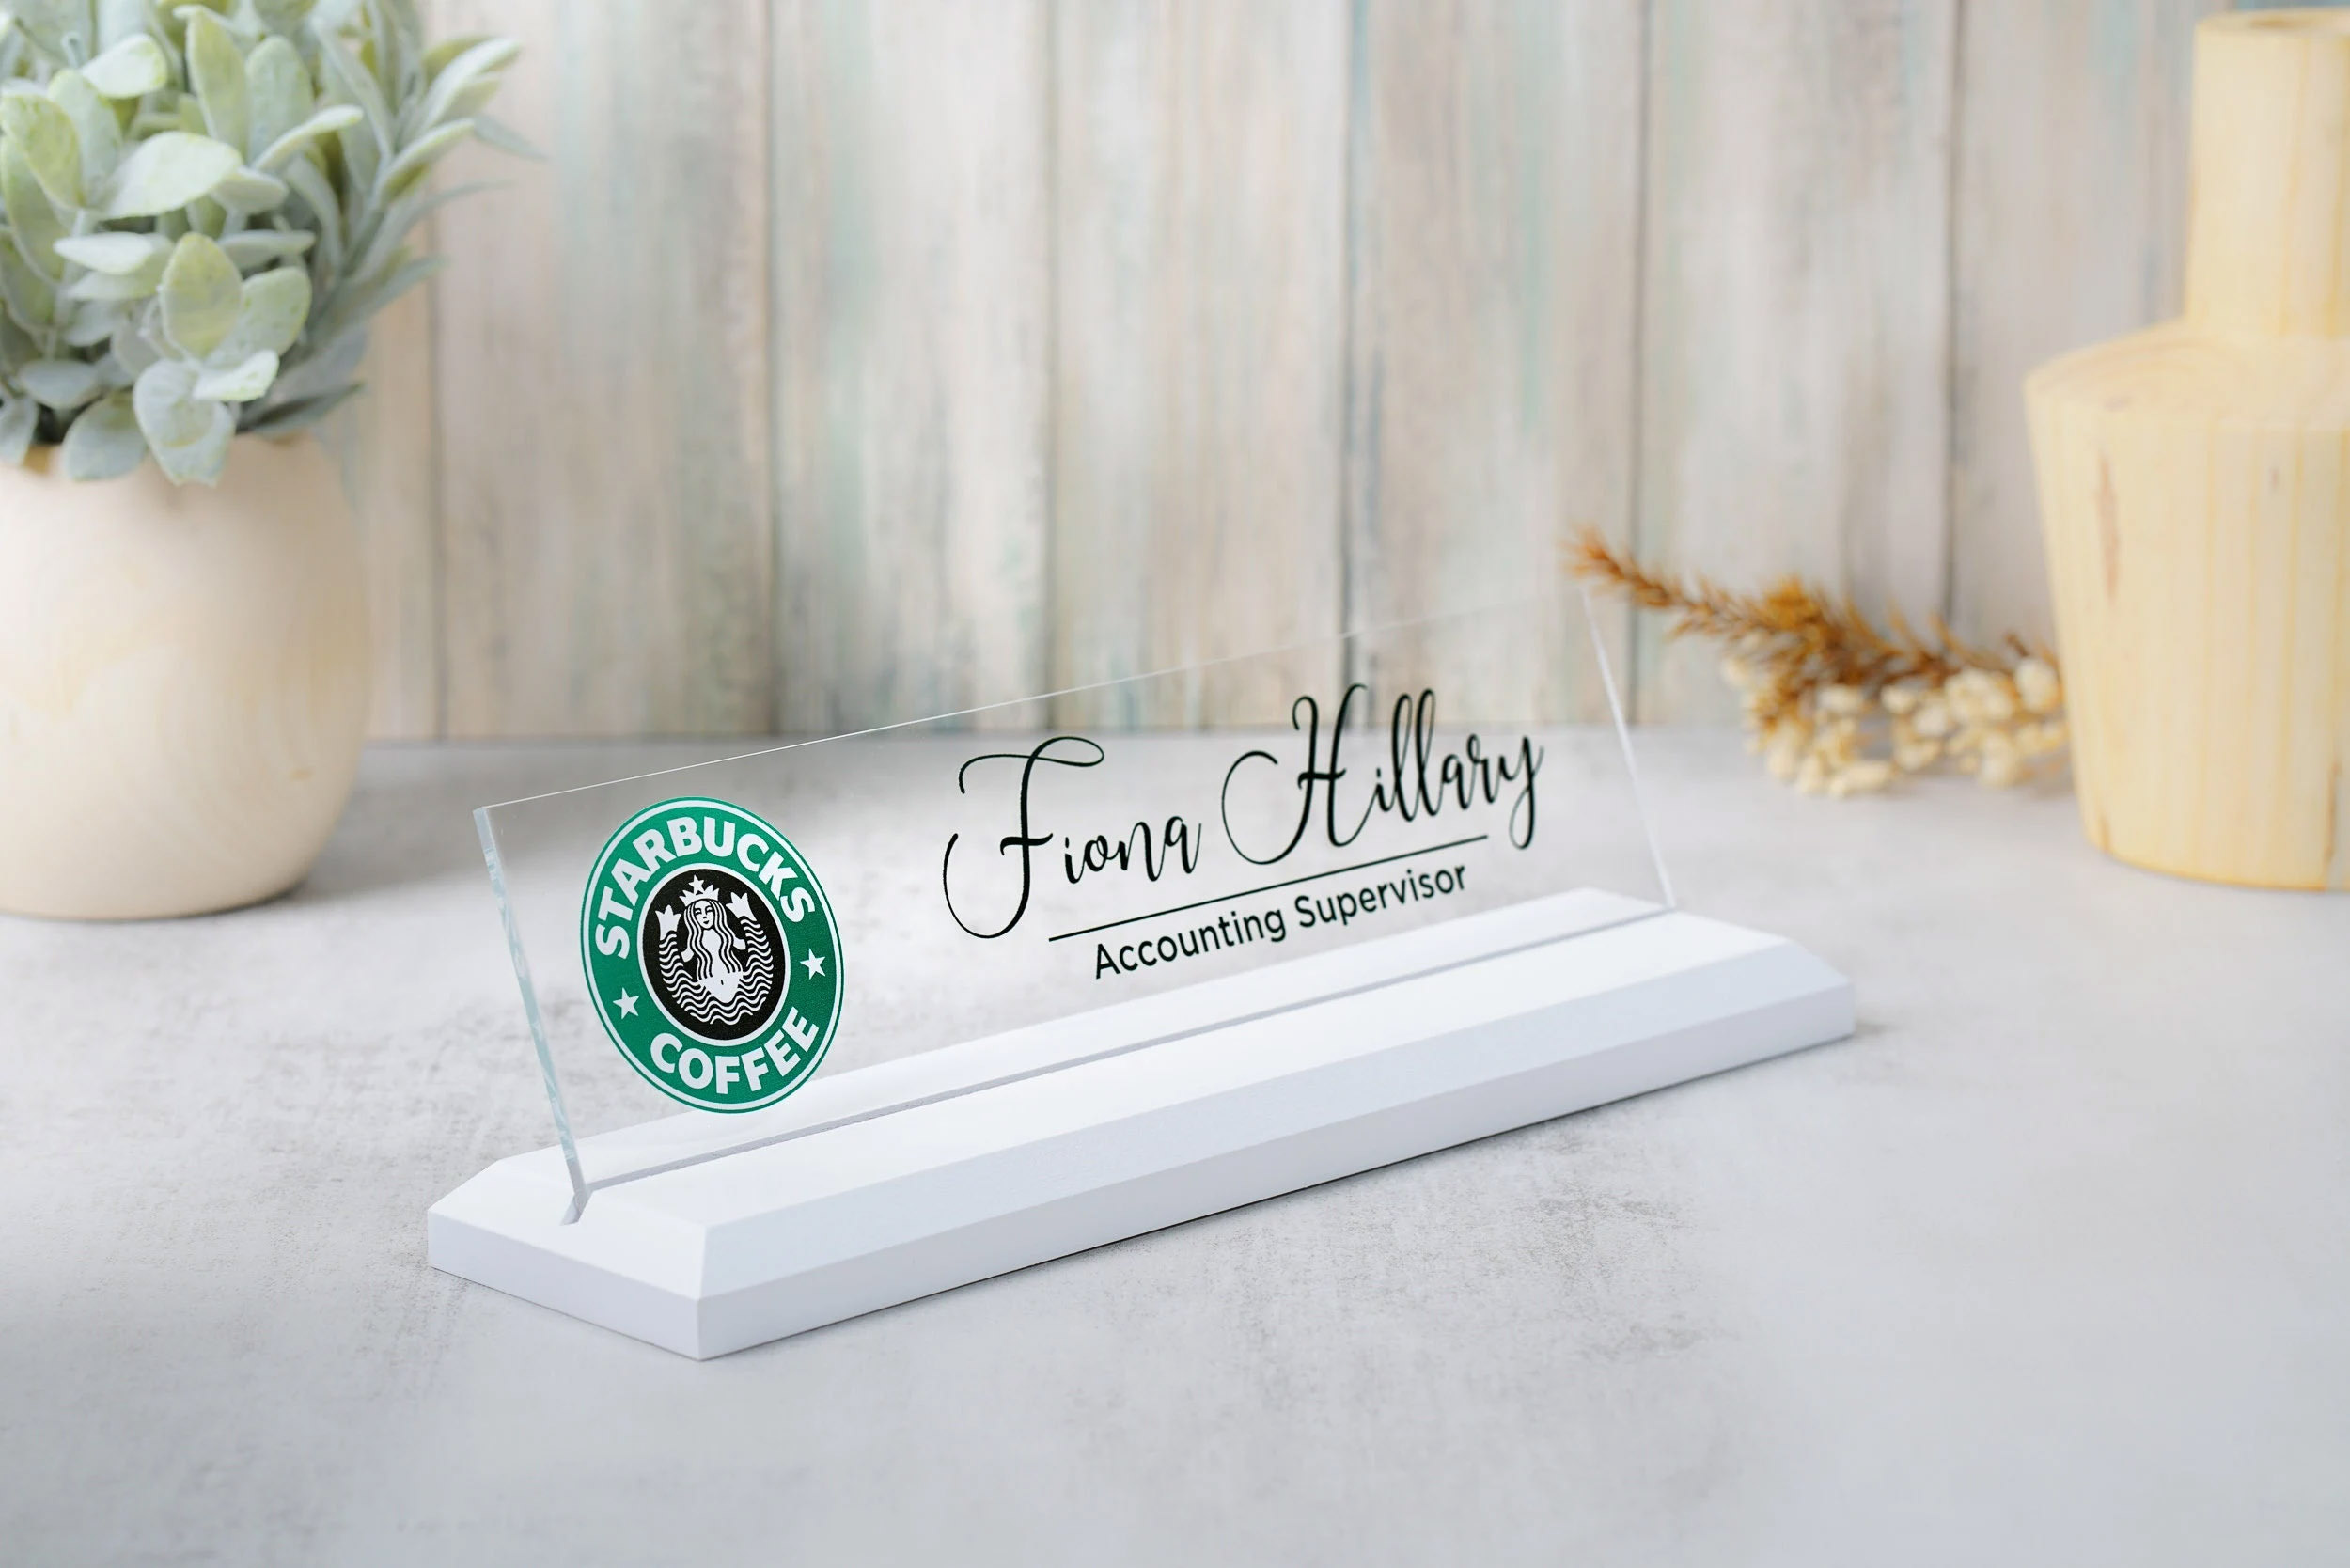 Personalized Wooden Name Plate for CA: Gift/Send Old Pers Gifts Online  M11067008 |IGP.com